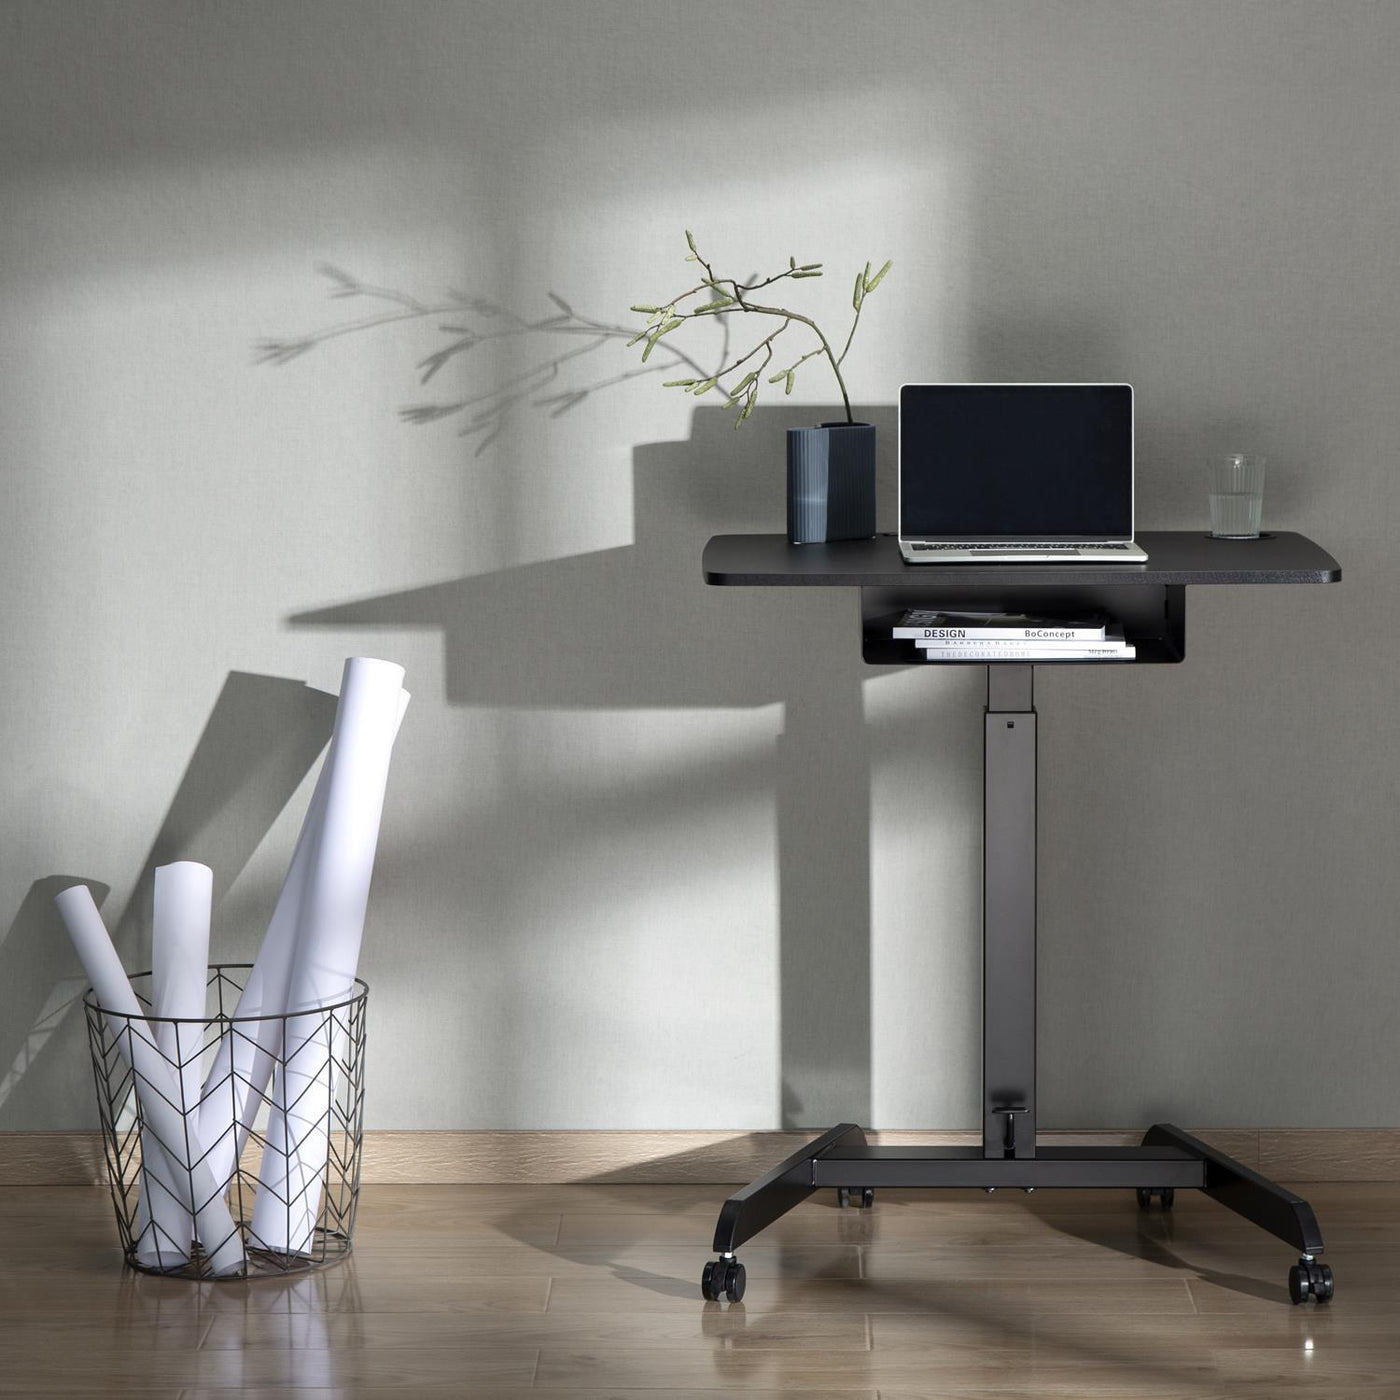 Maclean MC-903B Height Adjustable Laptop Desk with Wheels and One Drawer Sit-stand Desk Black